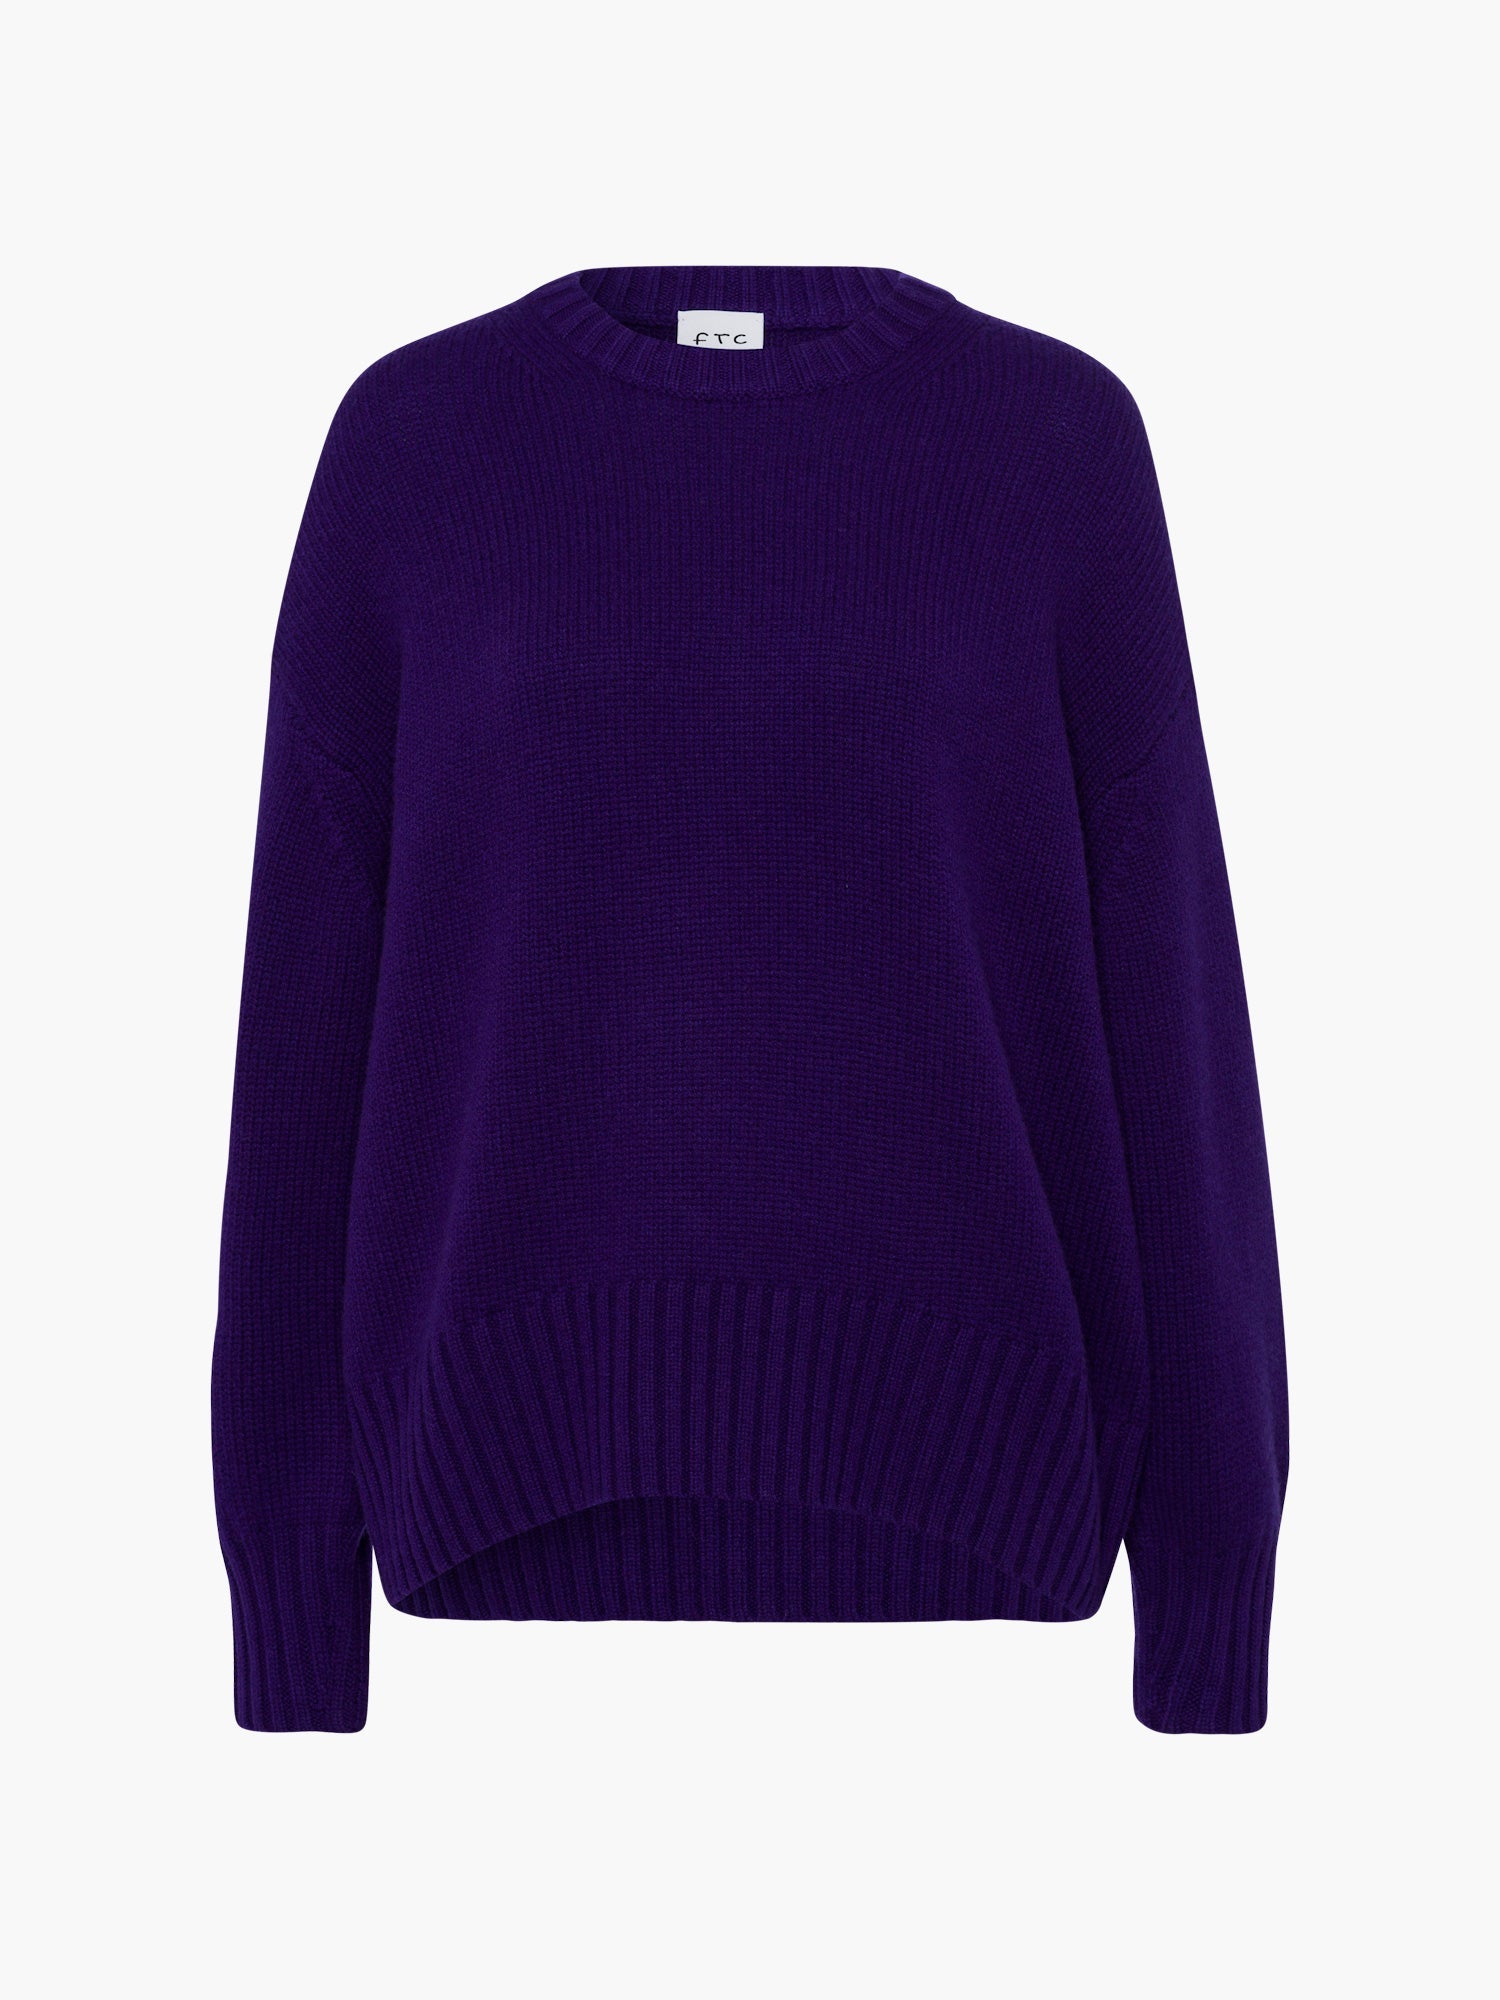 FTC-Cashmere-OUTLET-SALE-Pullover-RN-Strick-ARCHIVE-COLLECTION_a60280b0-f36f-4276-a2b9-673448c51ec2.jpg